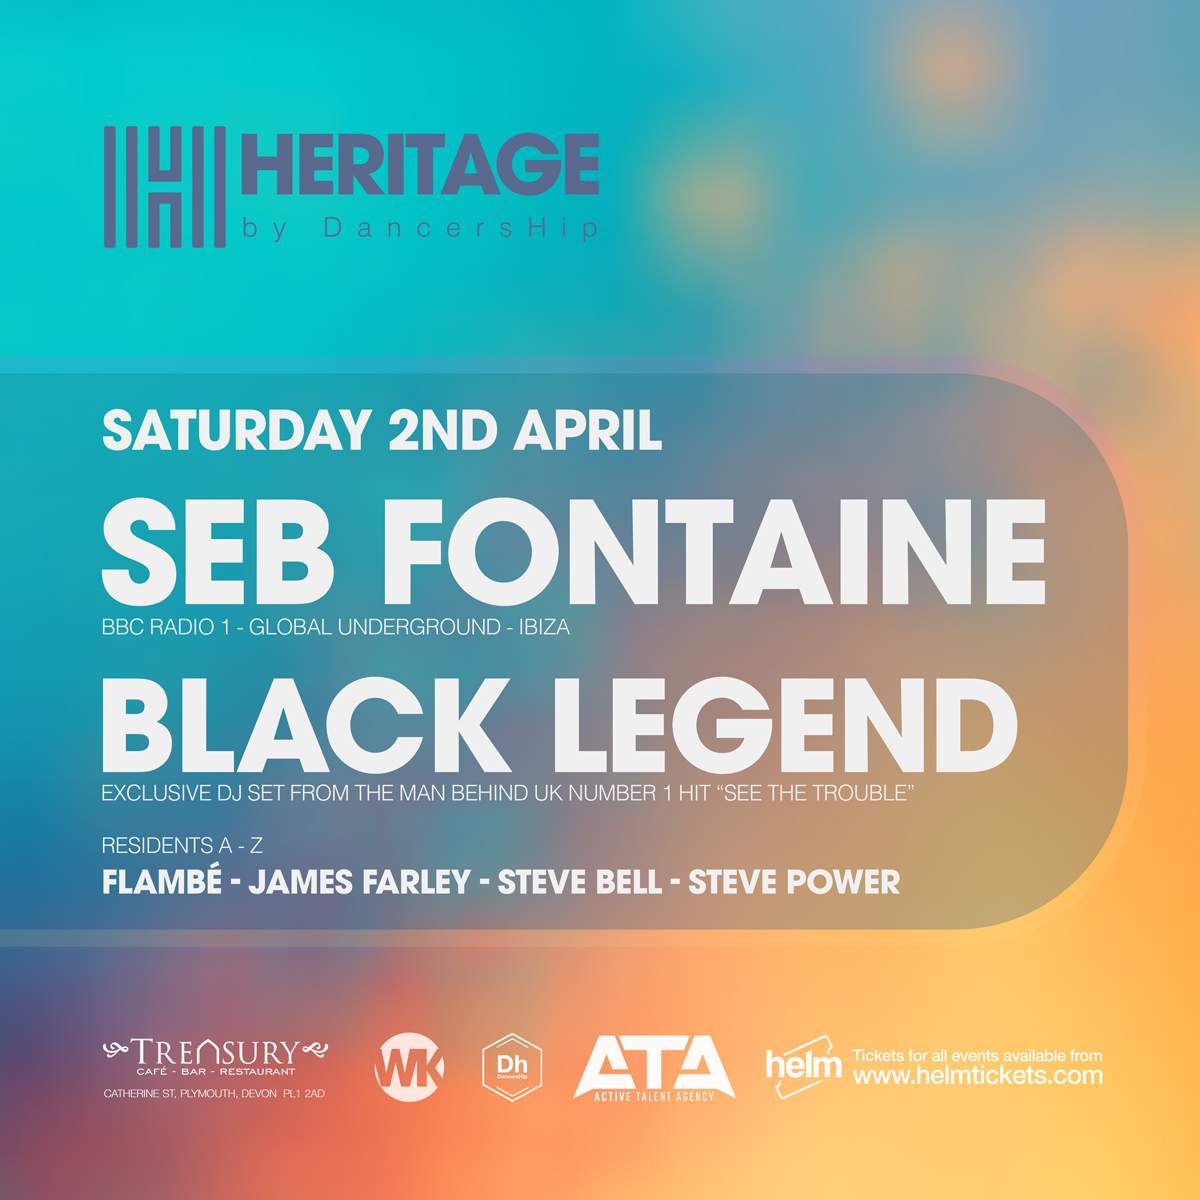 Heritage with Seb Fontaine & Black Legend - フライヤー表